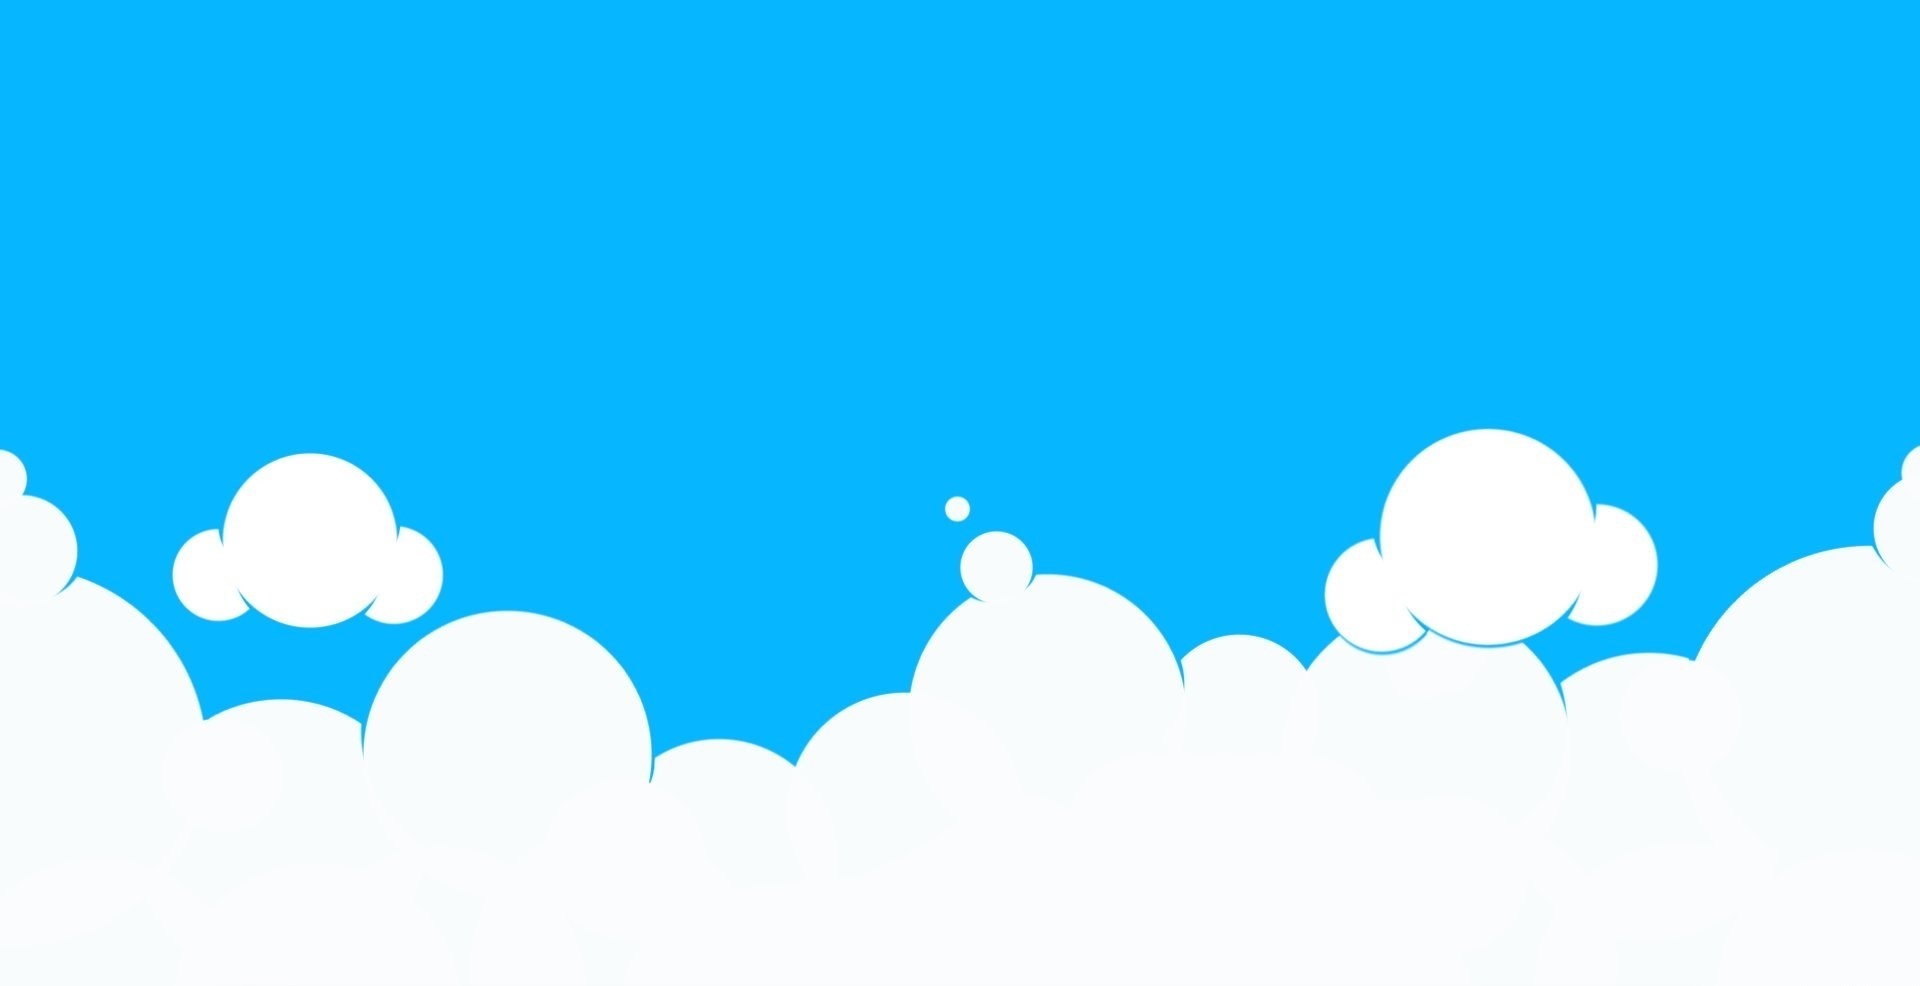 Clouds Background Png   Clipart Panda   Free Clipart Images